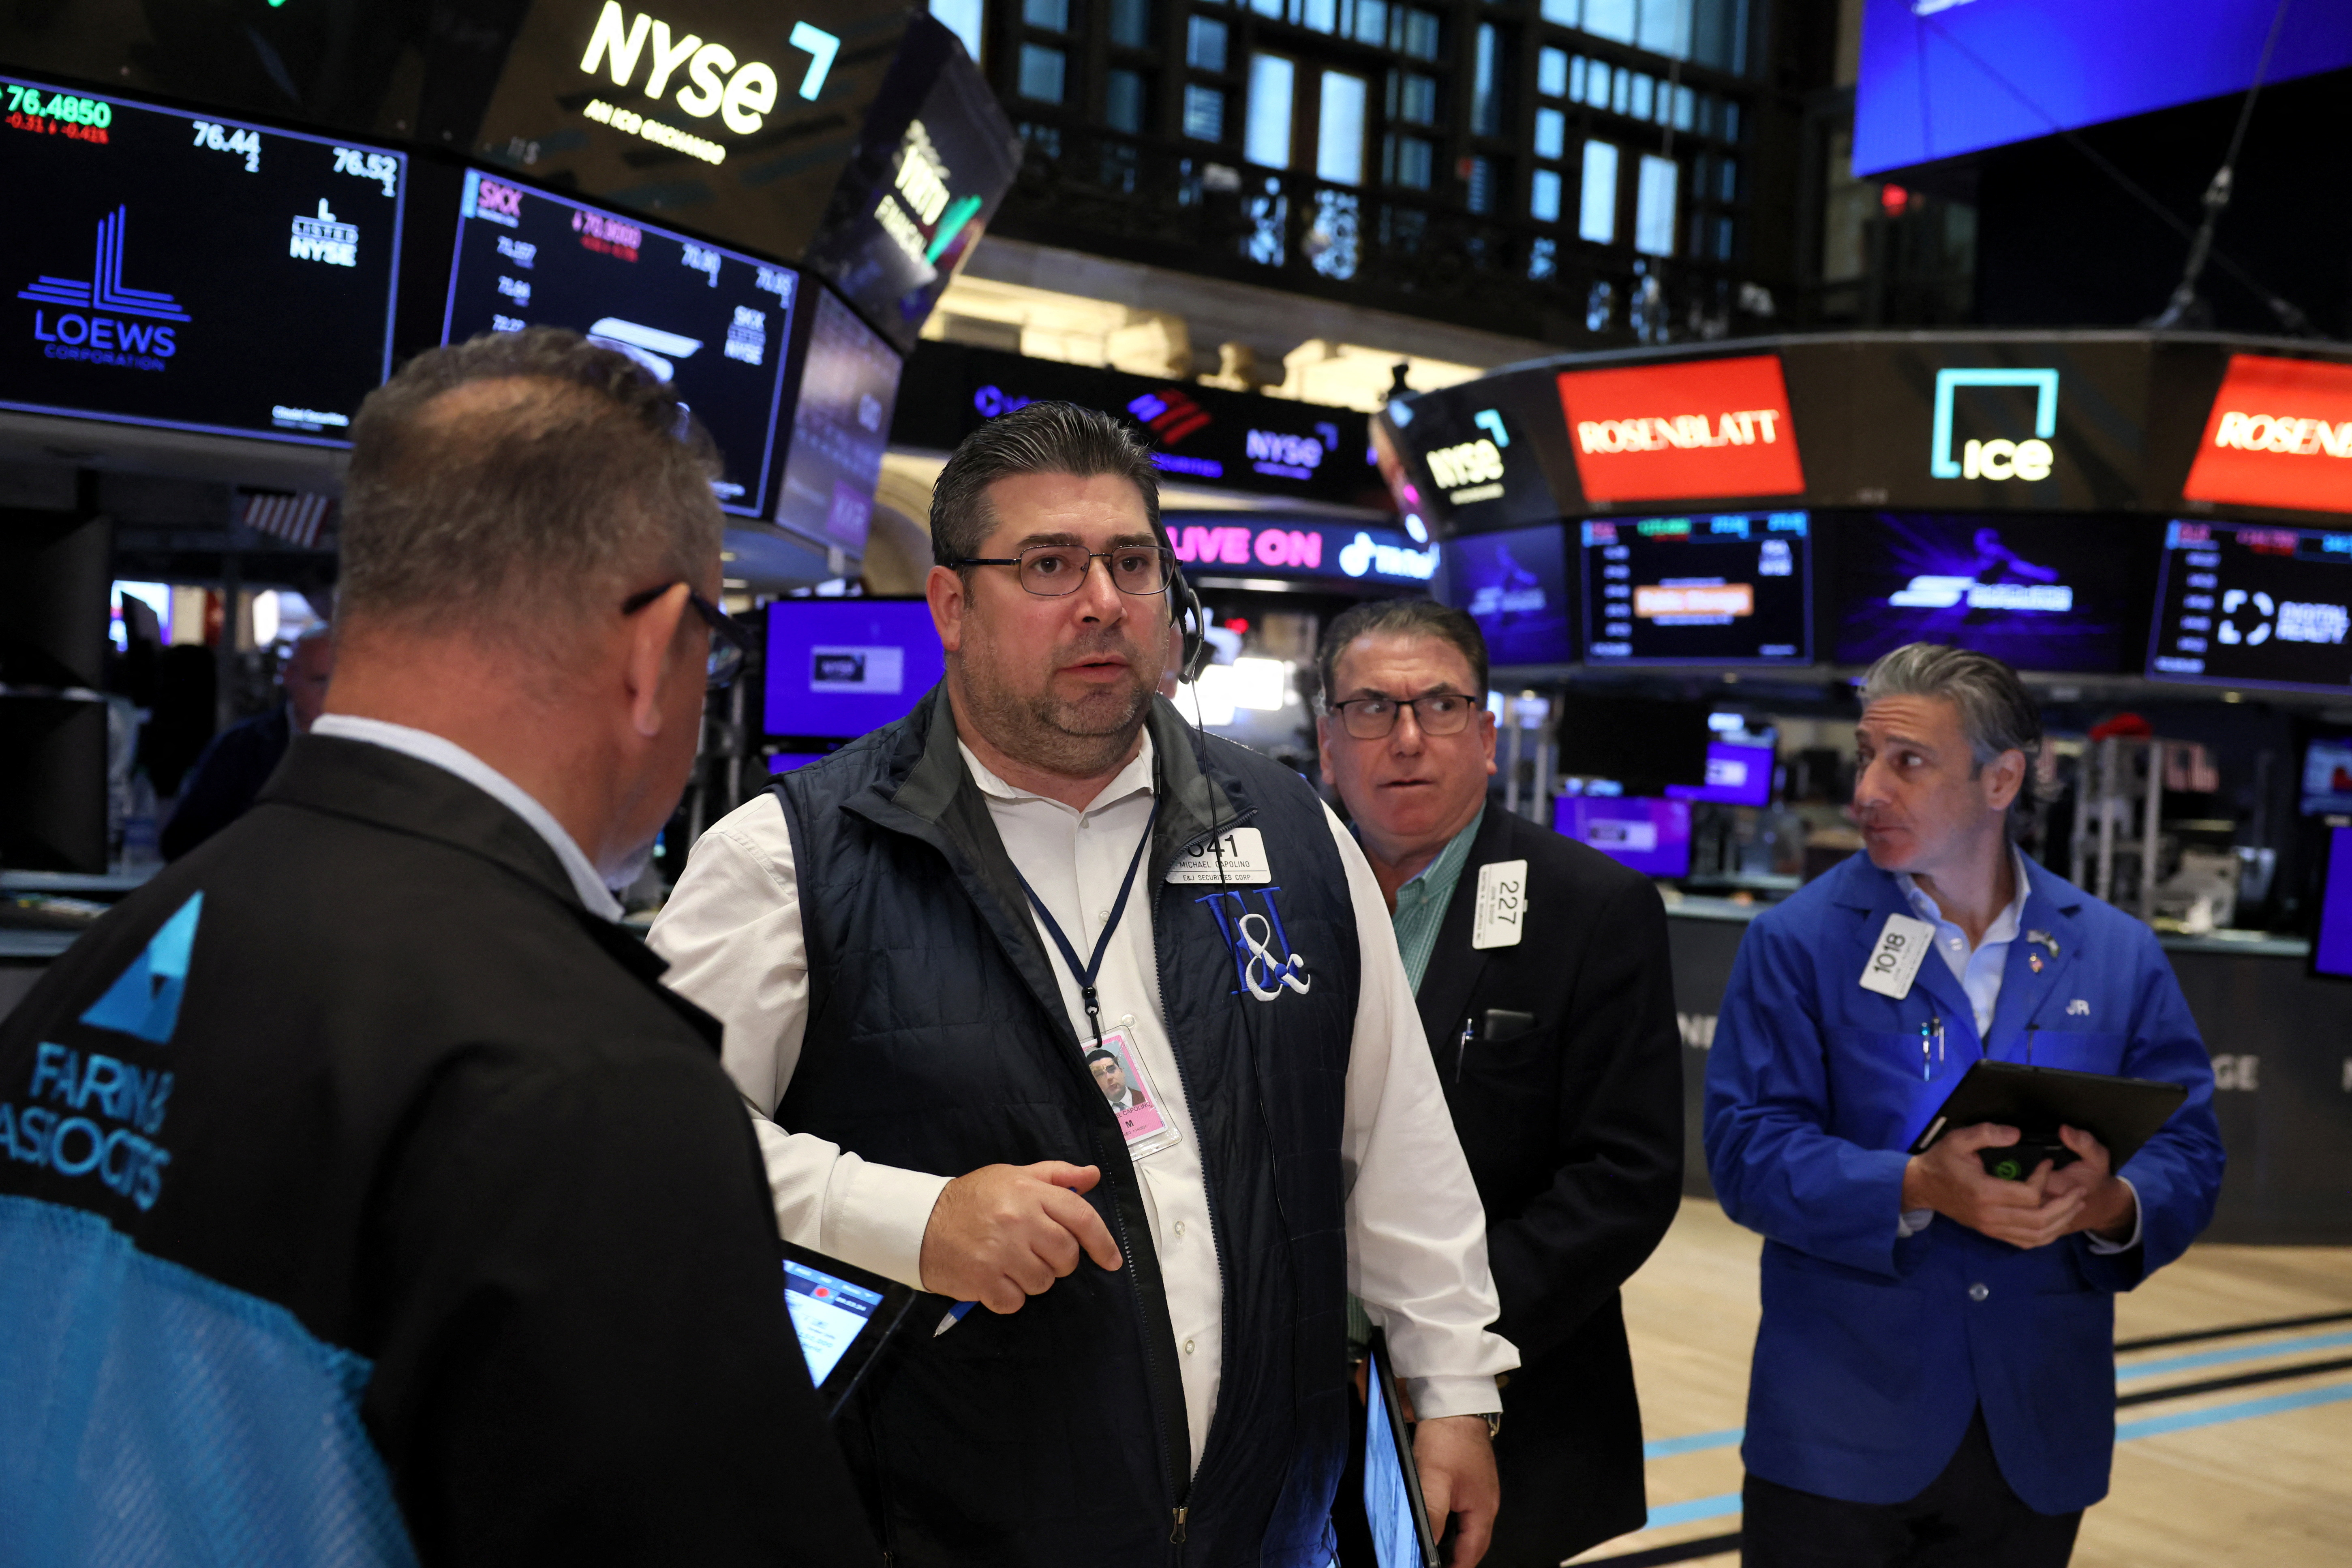 Traders and floor officials react to technical issues on the floor of the NYSE in New York